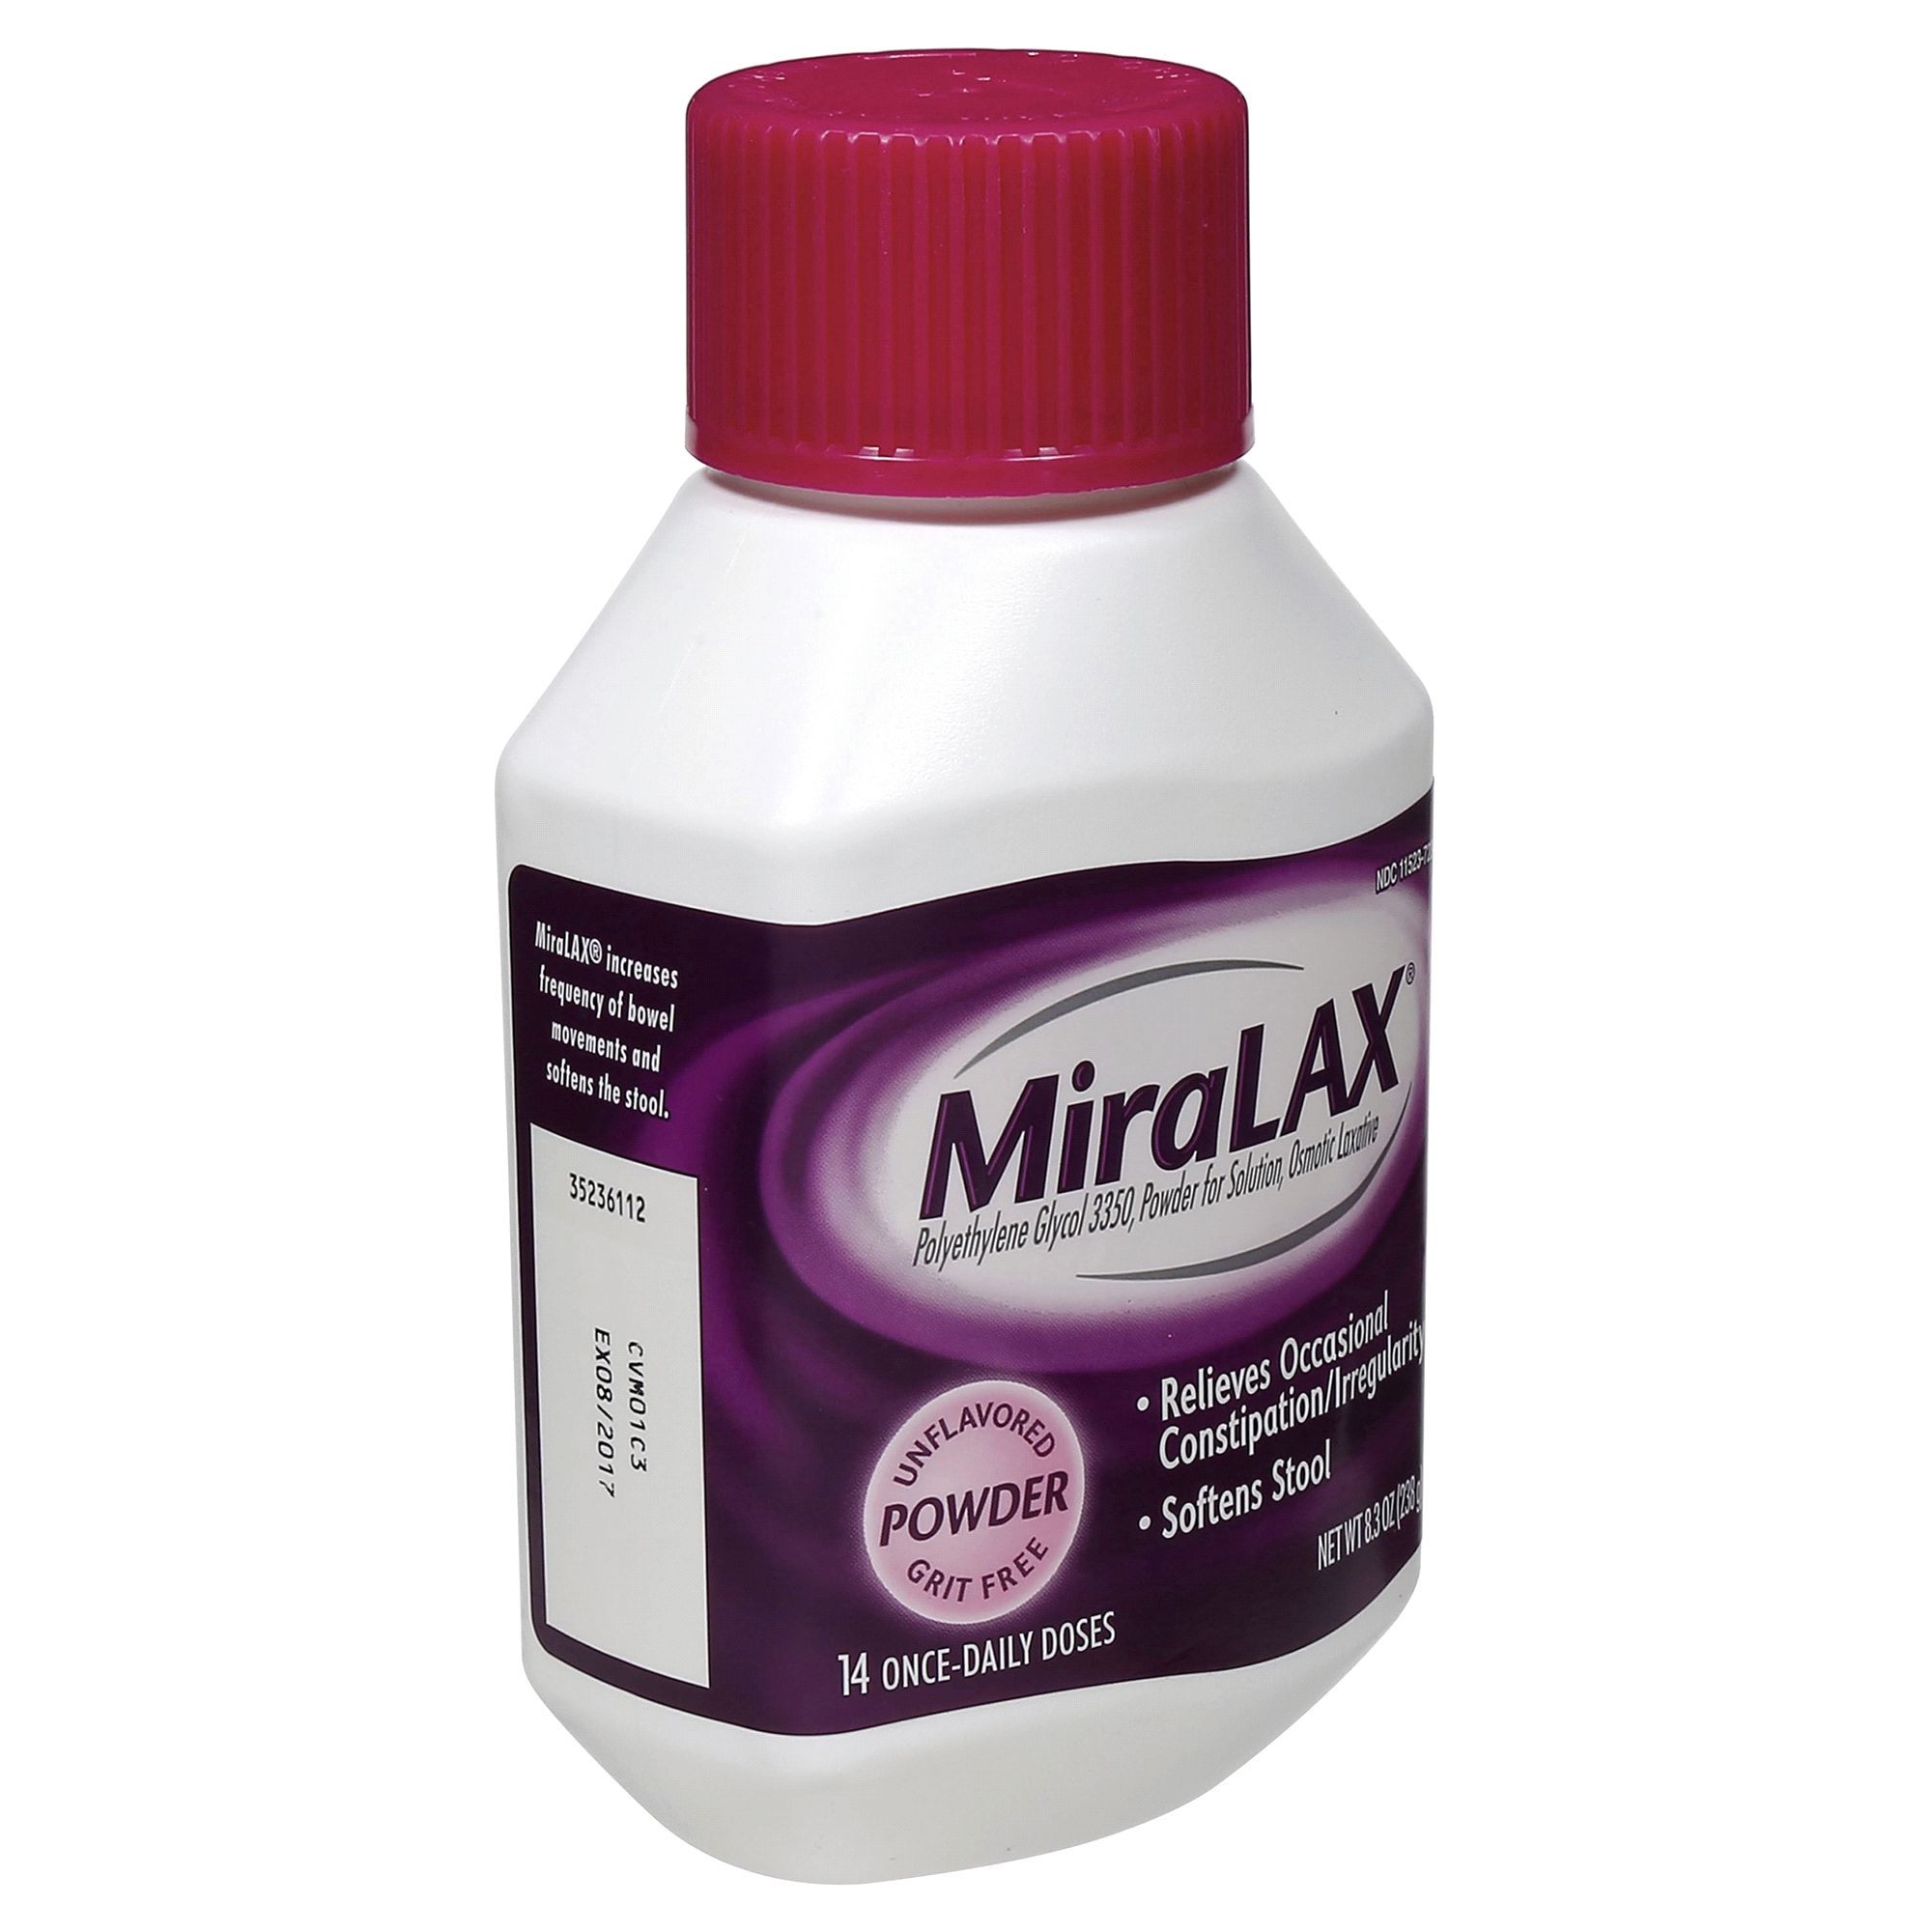 how long does it take for miralax to work